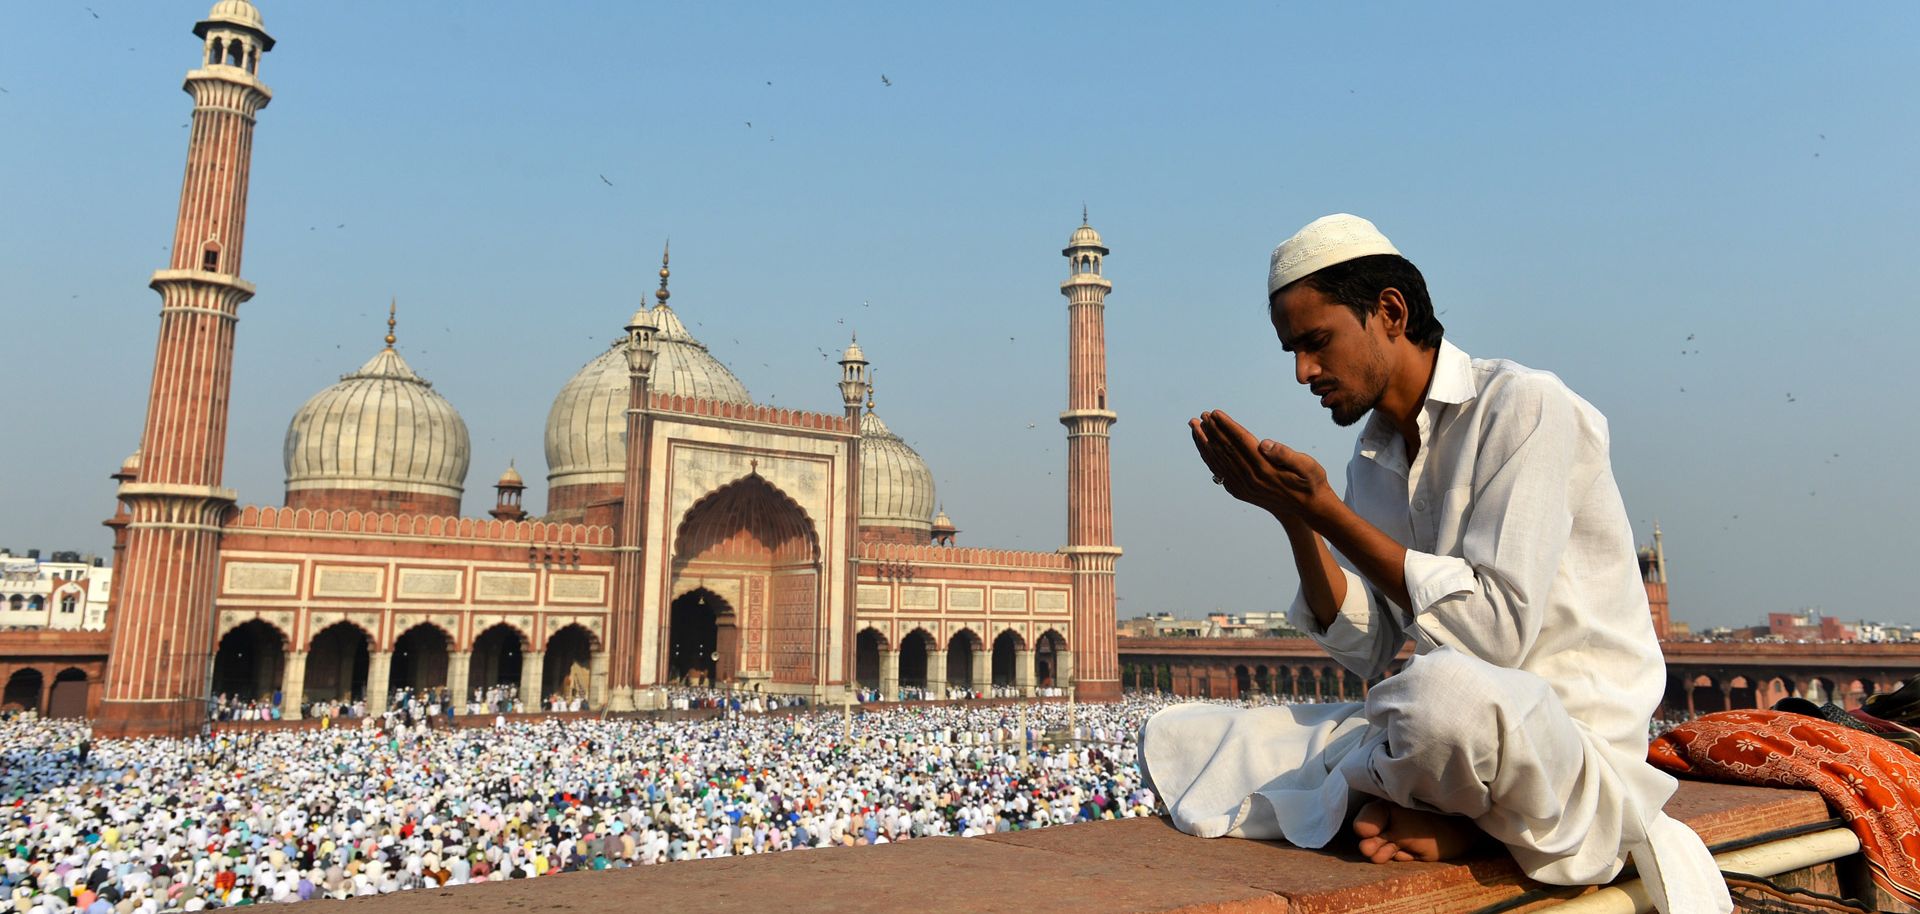 An Indian Muslim devotee offers prayers during Eid al-Adha at Jama Masjid in New Delhi on October 6, 2014. Muslims across the world are preparing to celebrate the annual festival of Eid al-Adha, or the Festival of Sacrifice, which marks the end of the Hajj pilgrimage to Mecca and in commemoration of Prophet Abraham's readiness to sacrifice his son to show obedience to God.